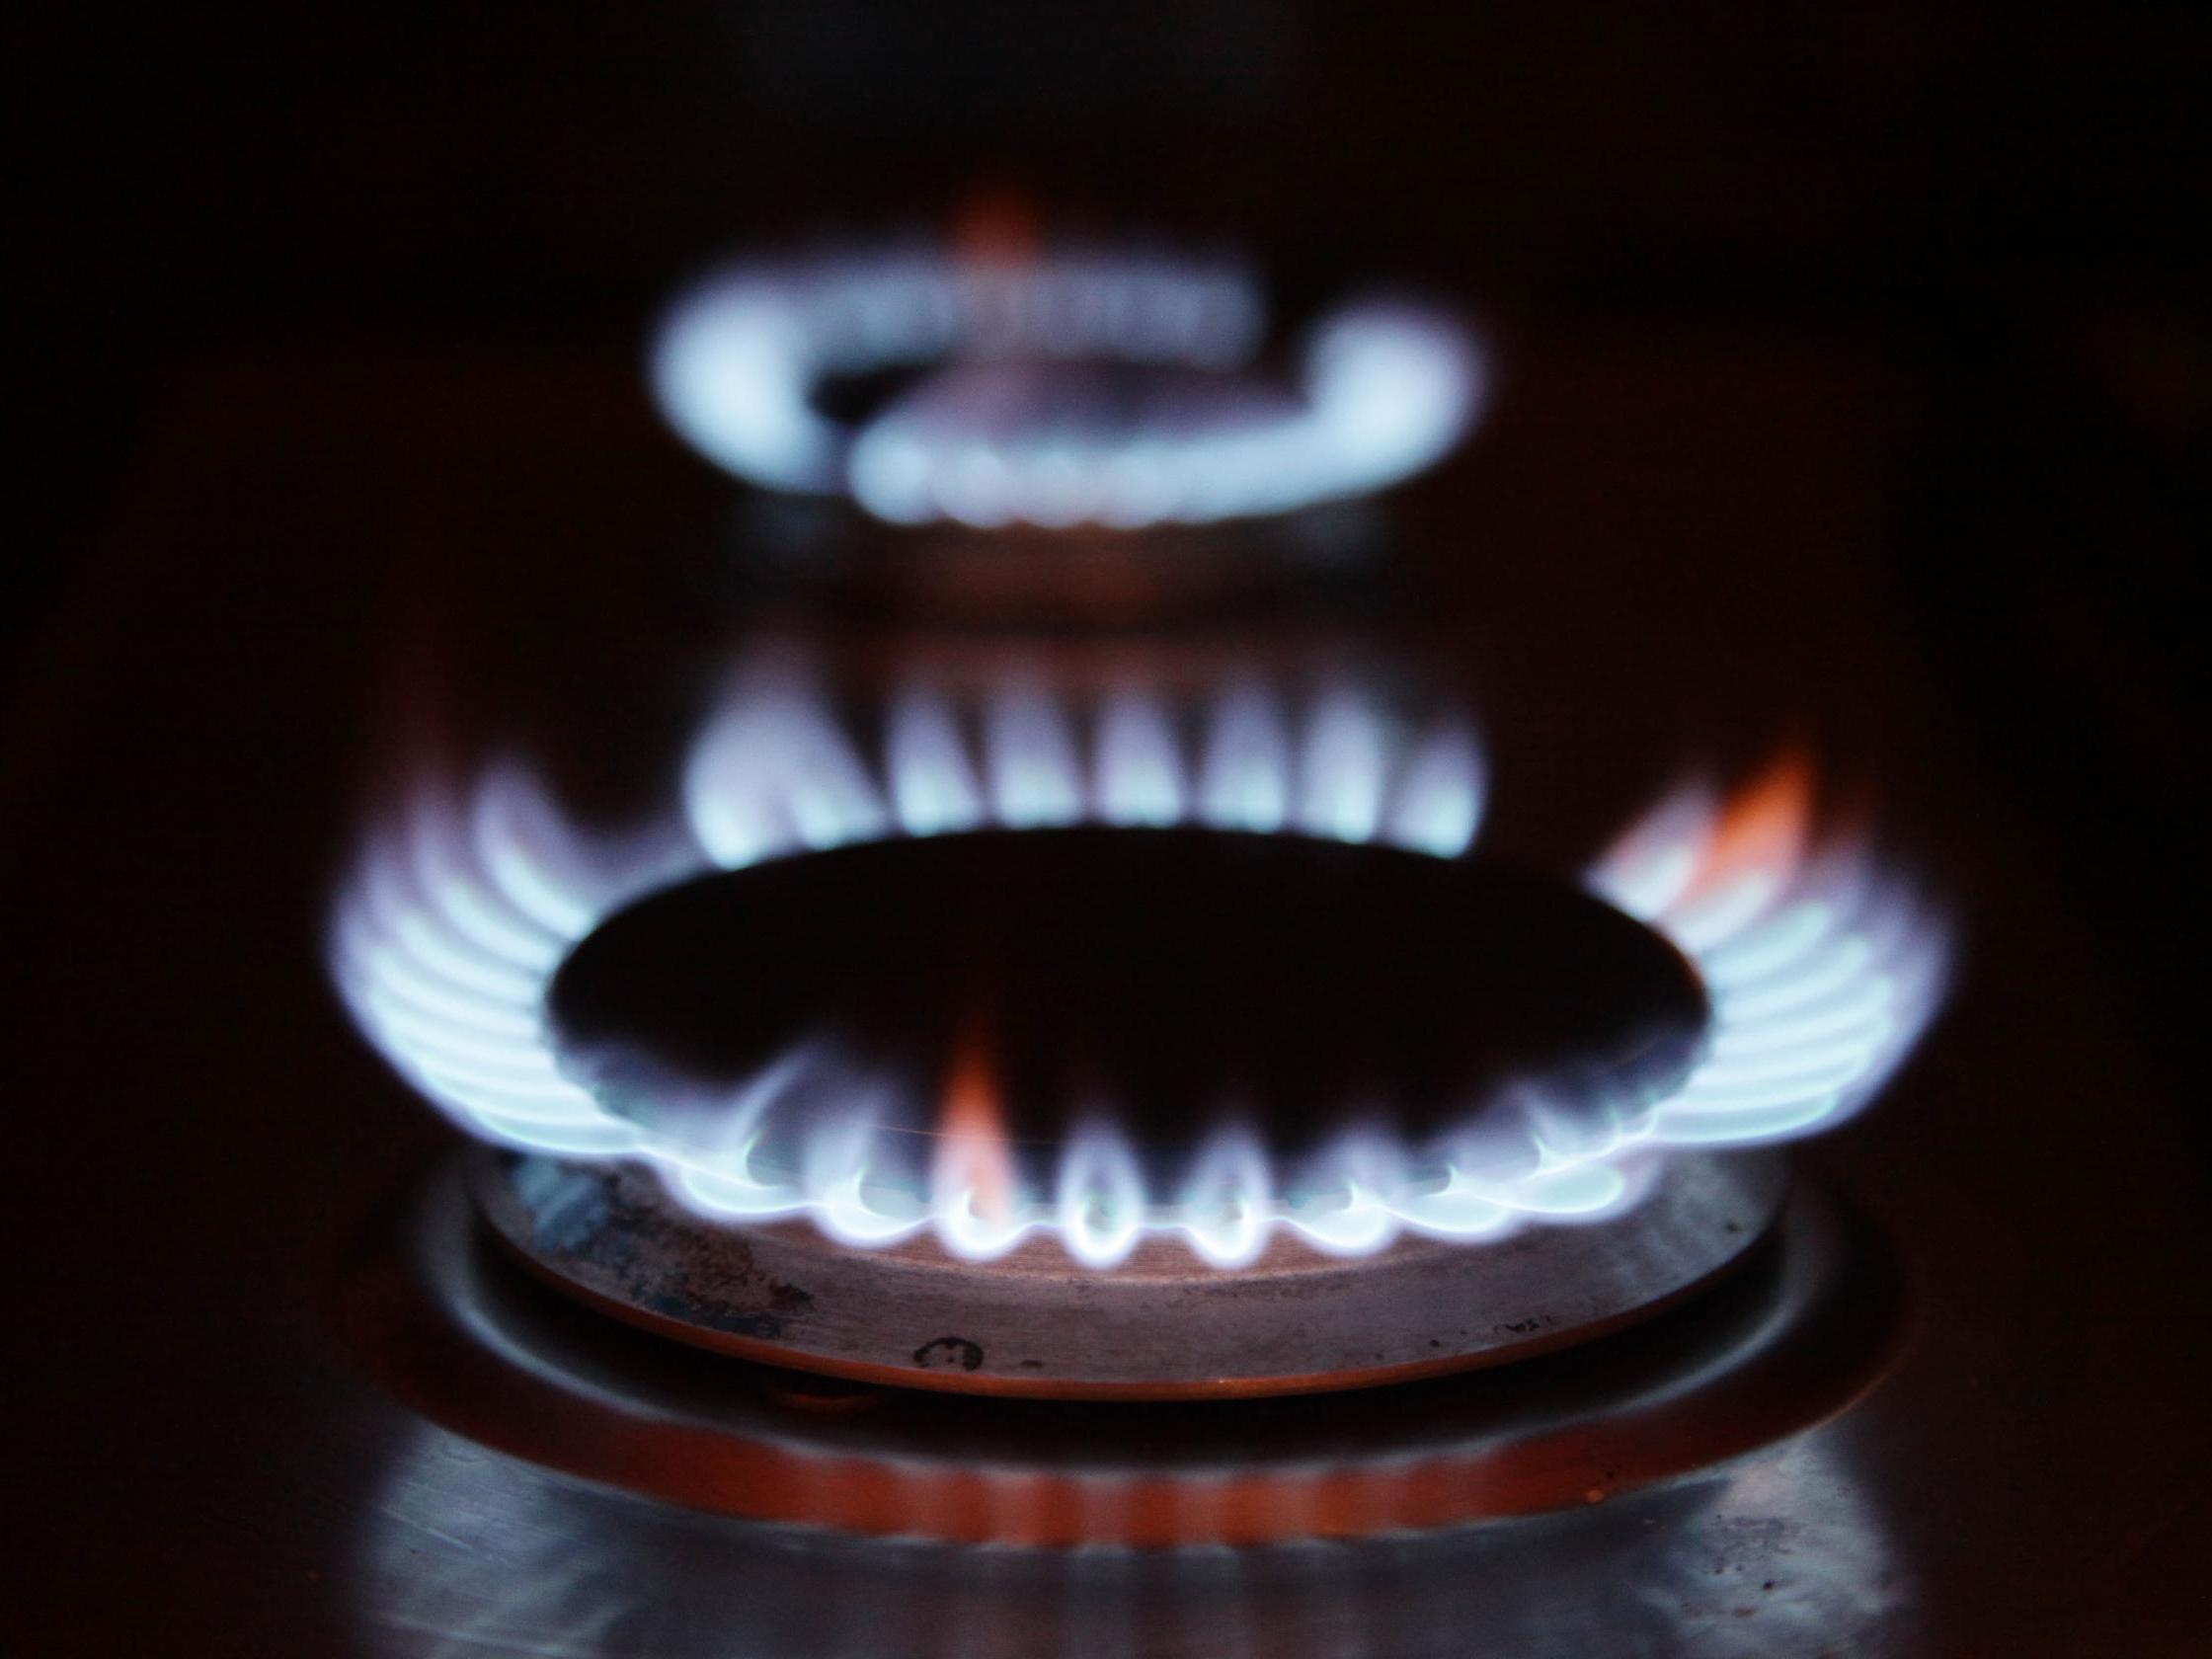 Gas and electricity companies will be forced to pay customers £30 for problems they encounter switching suppliers